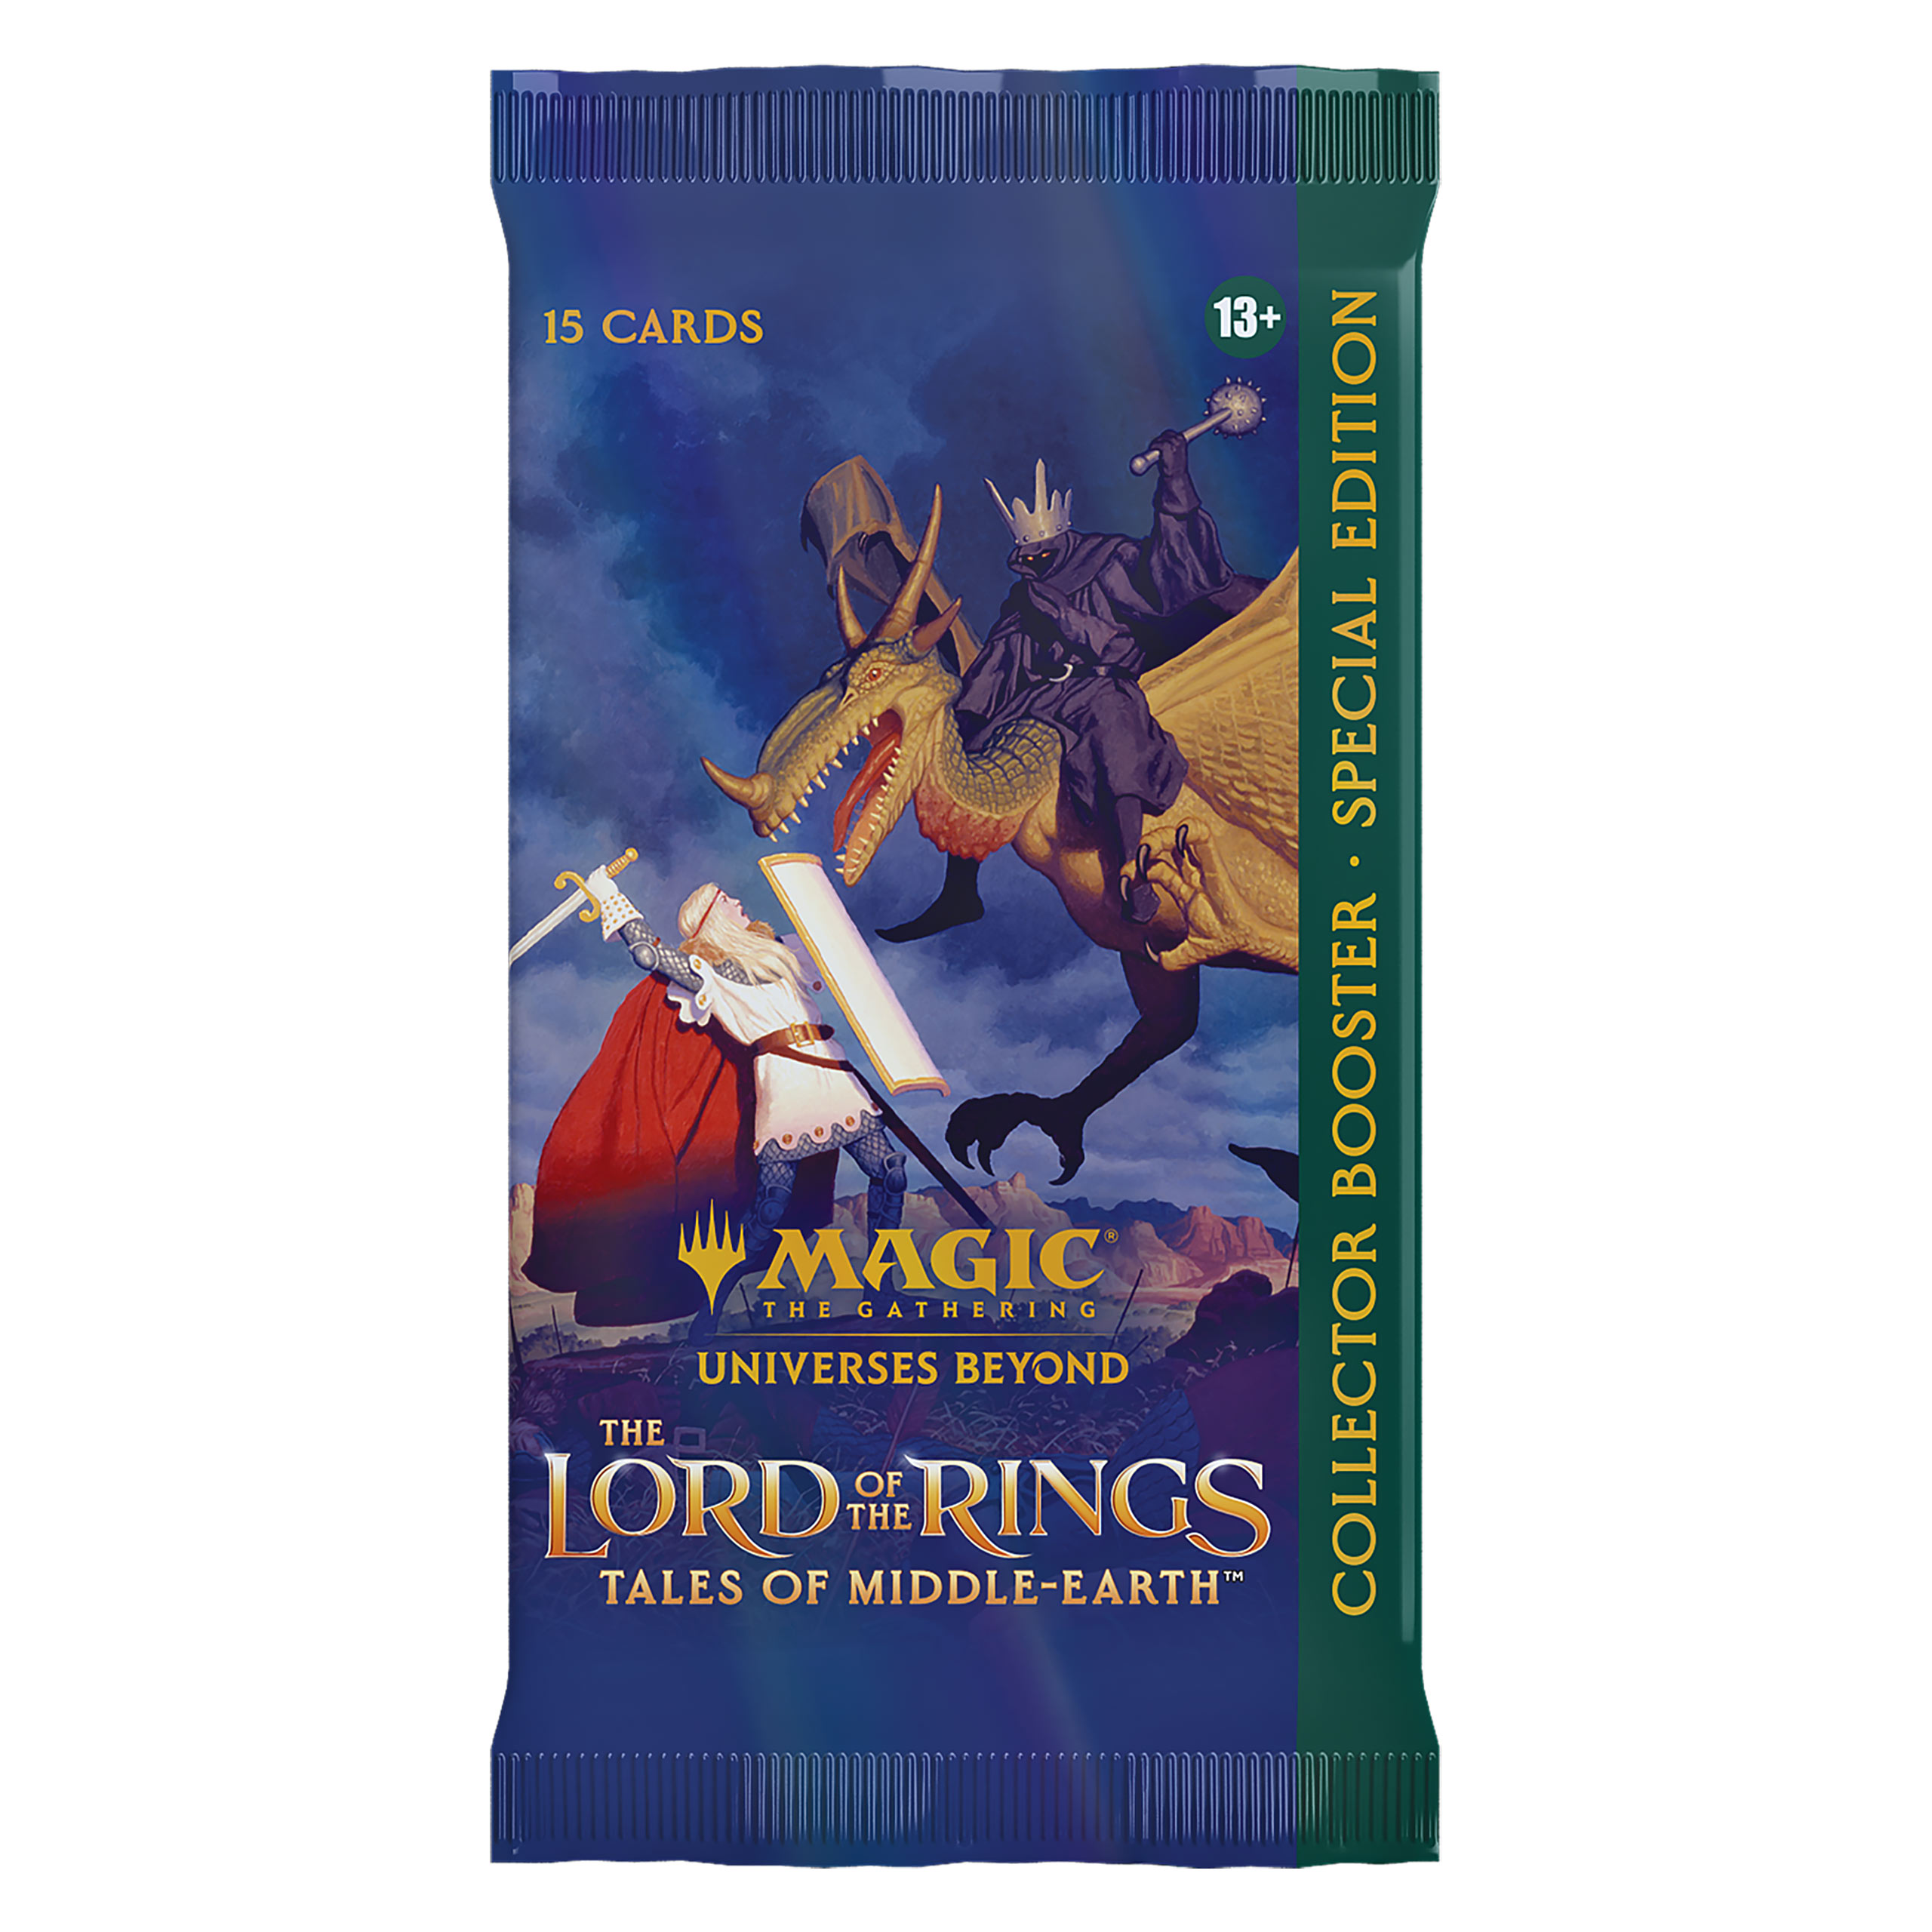 Herr der Ringe Tales of Middle-Earth Collector Booster englische Version - Magic The Gathering